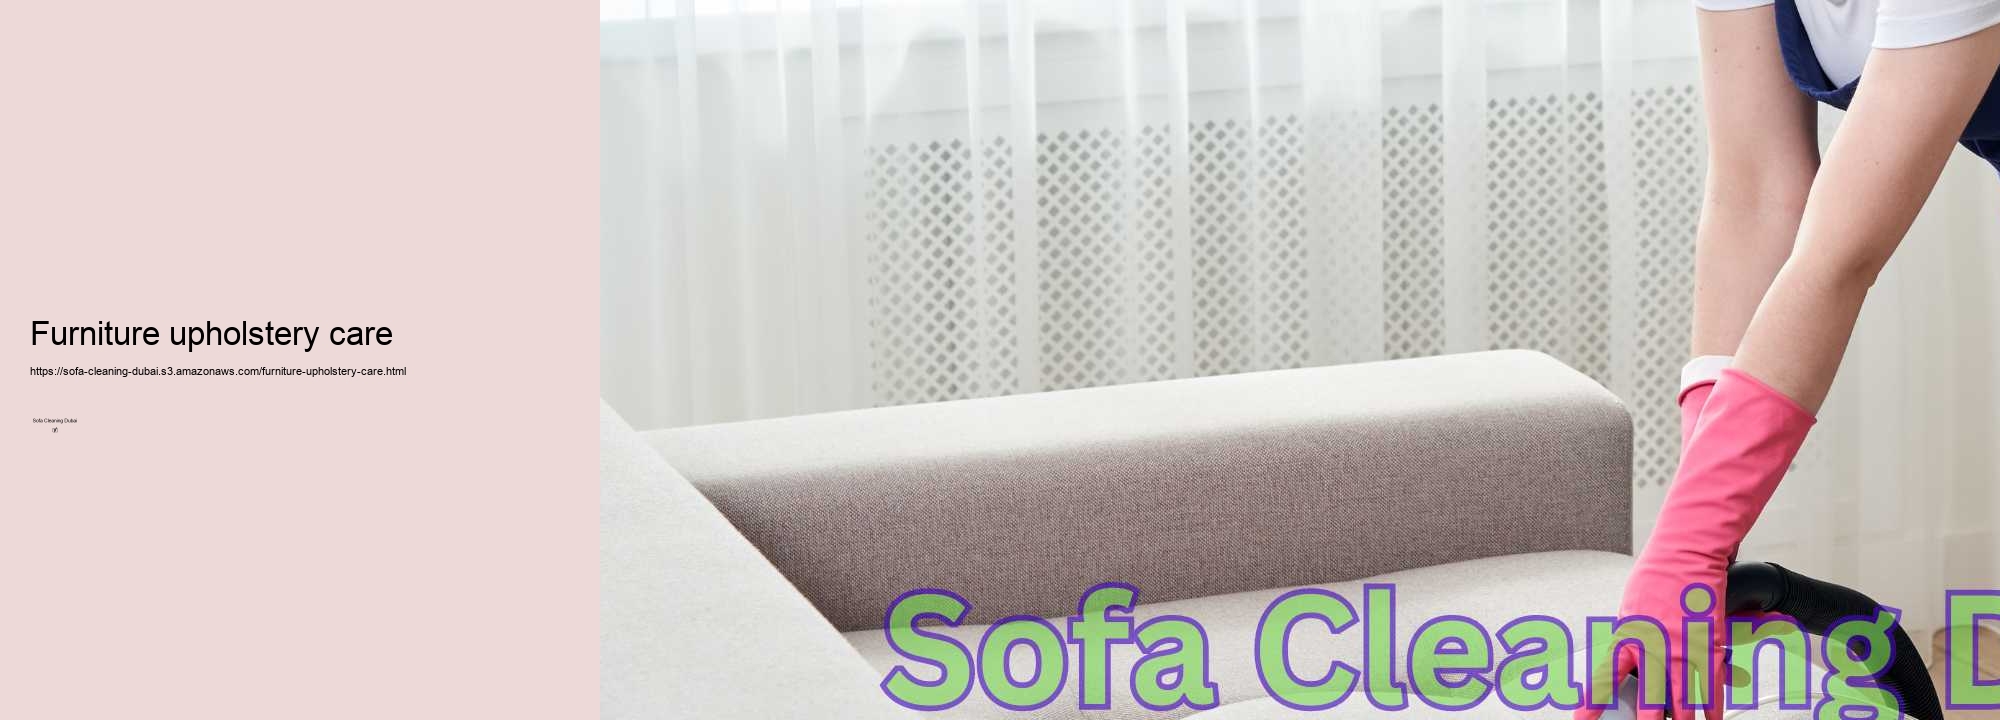 Furniture upholstery care